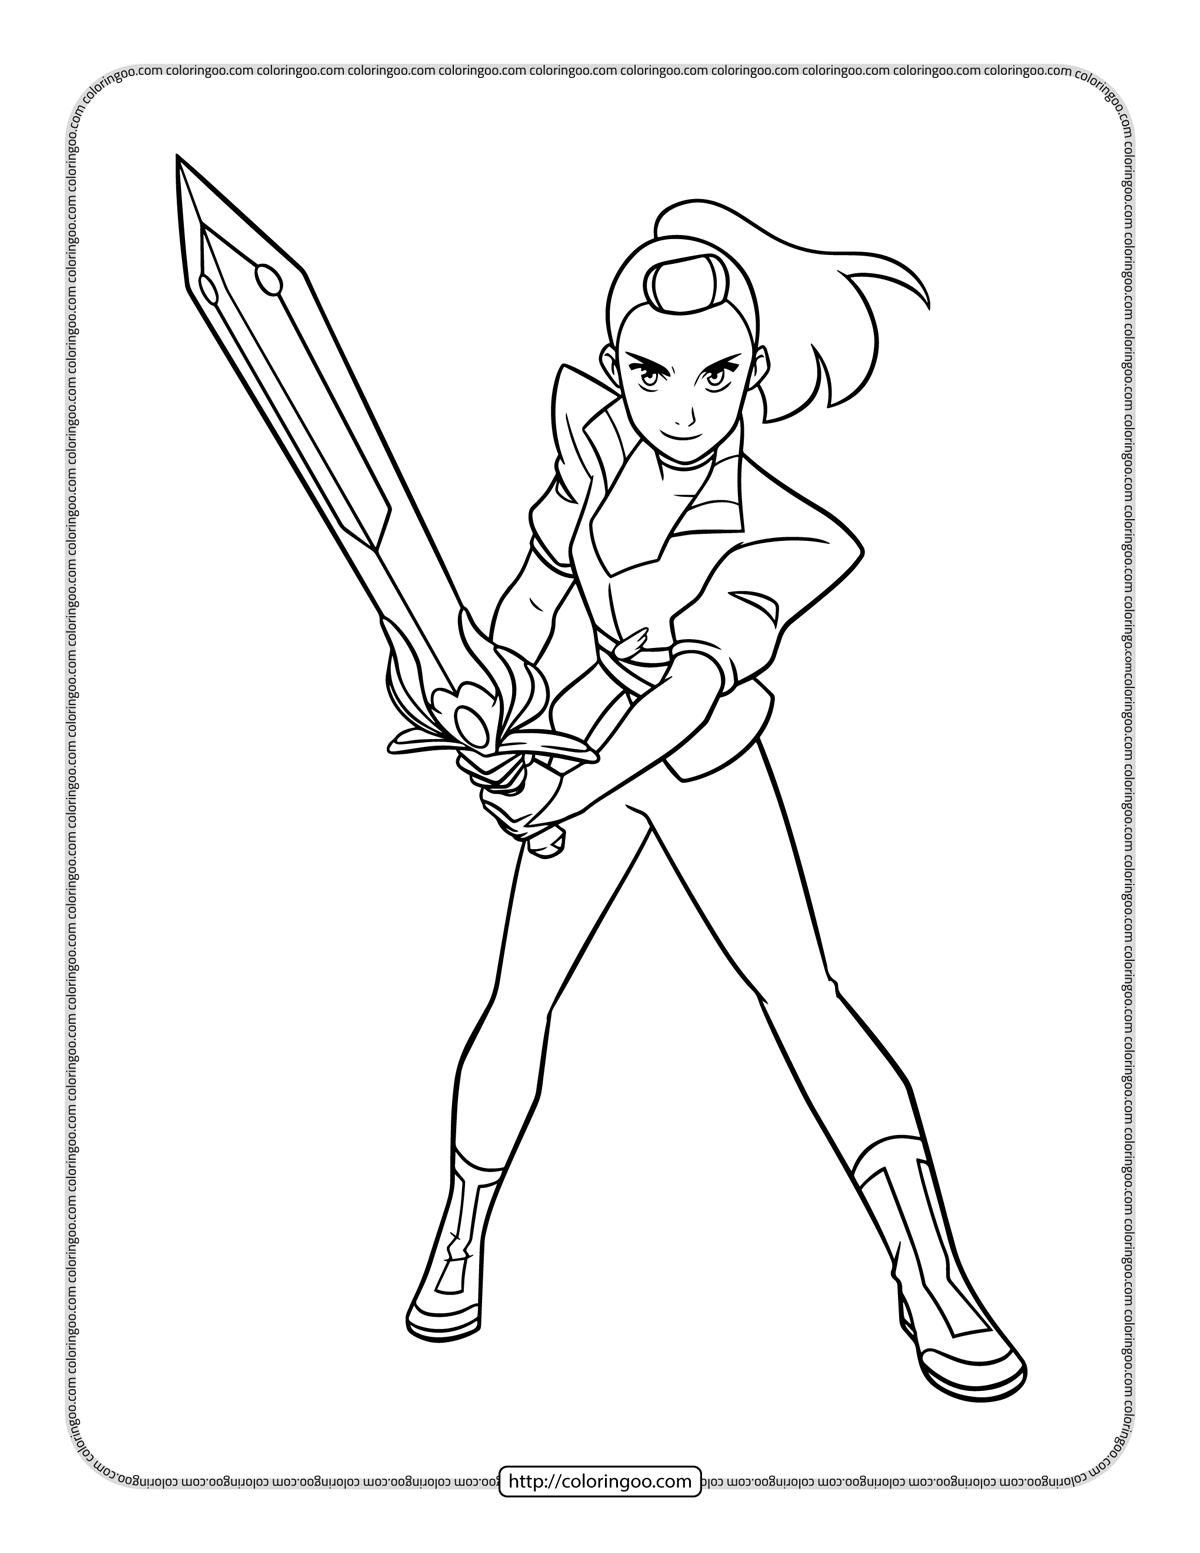 Adora She-Ra and The Princesses of Power Coloring Page